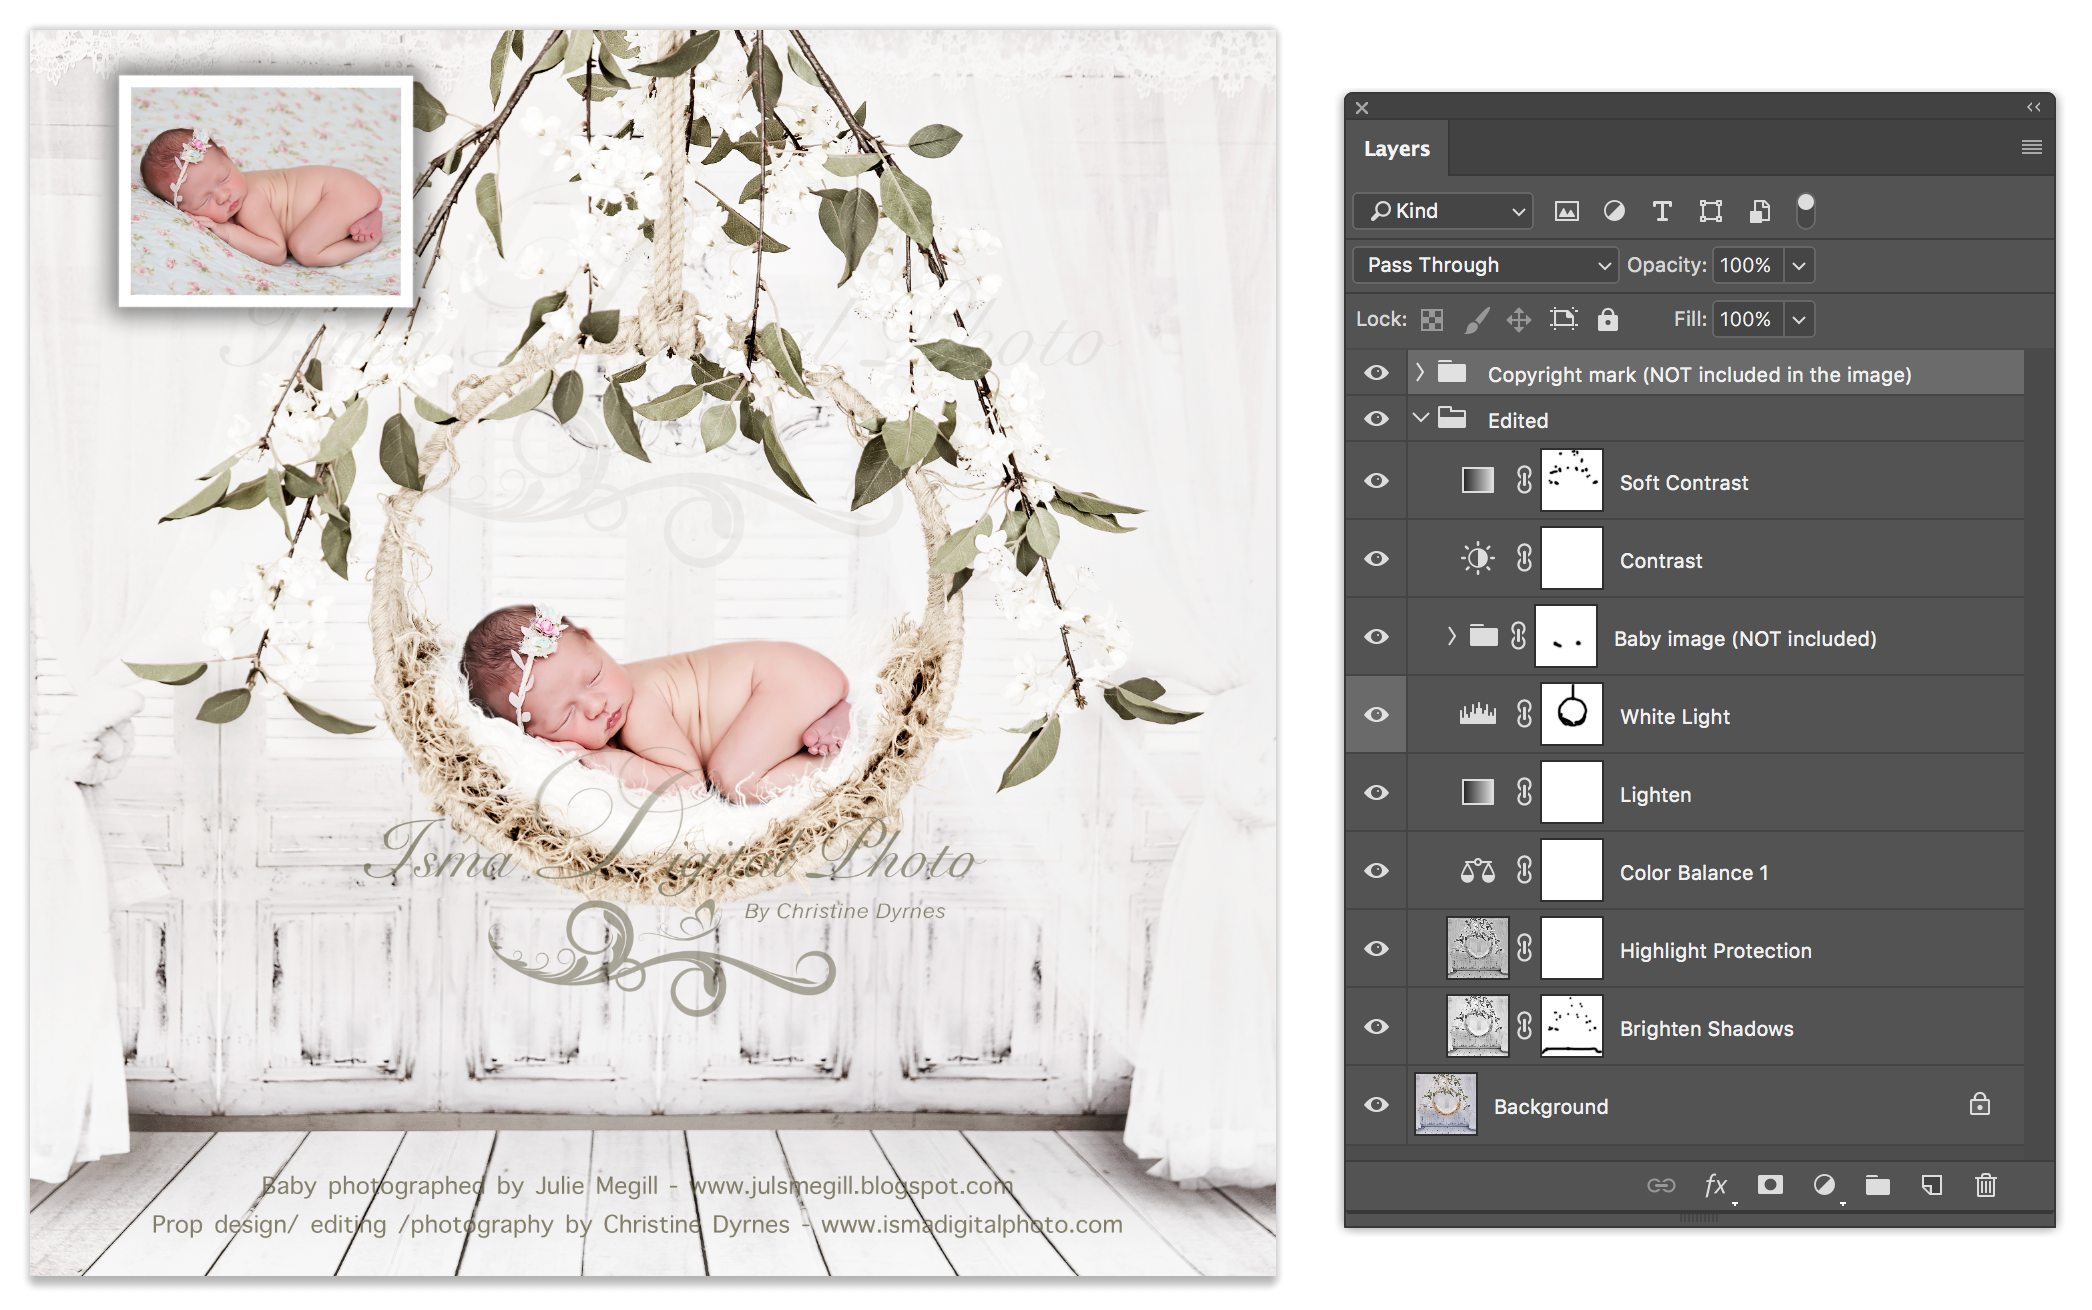 Digital backdrop /Props for Newborn /baby photography - High resolution digital backdrop /background - One JPG and one PSD file with layers